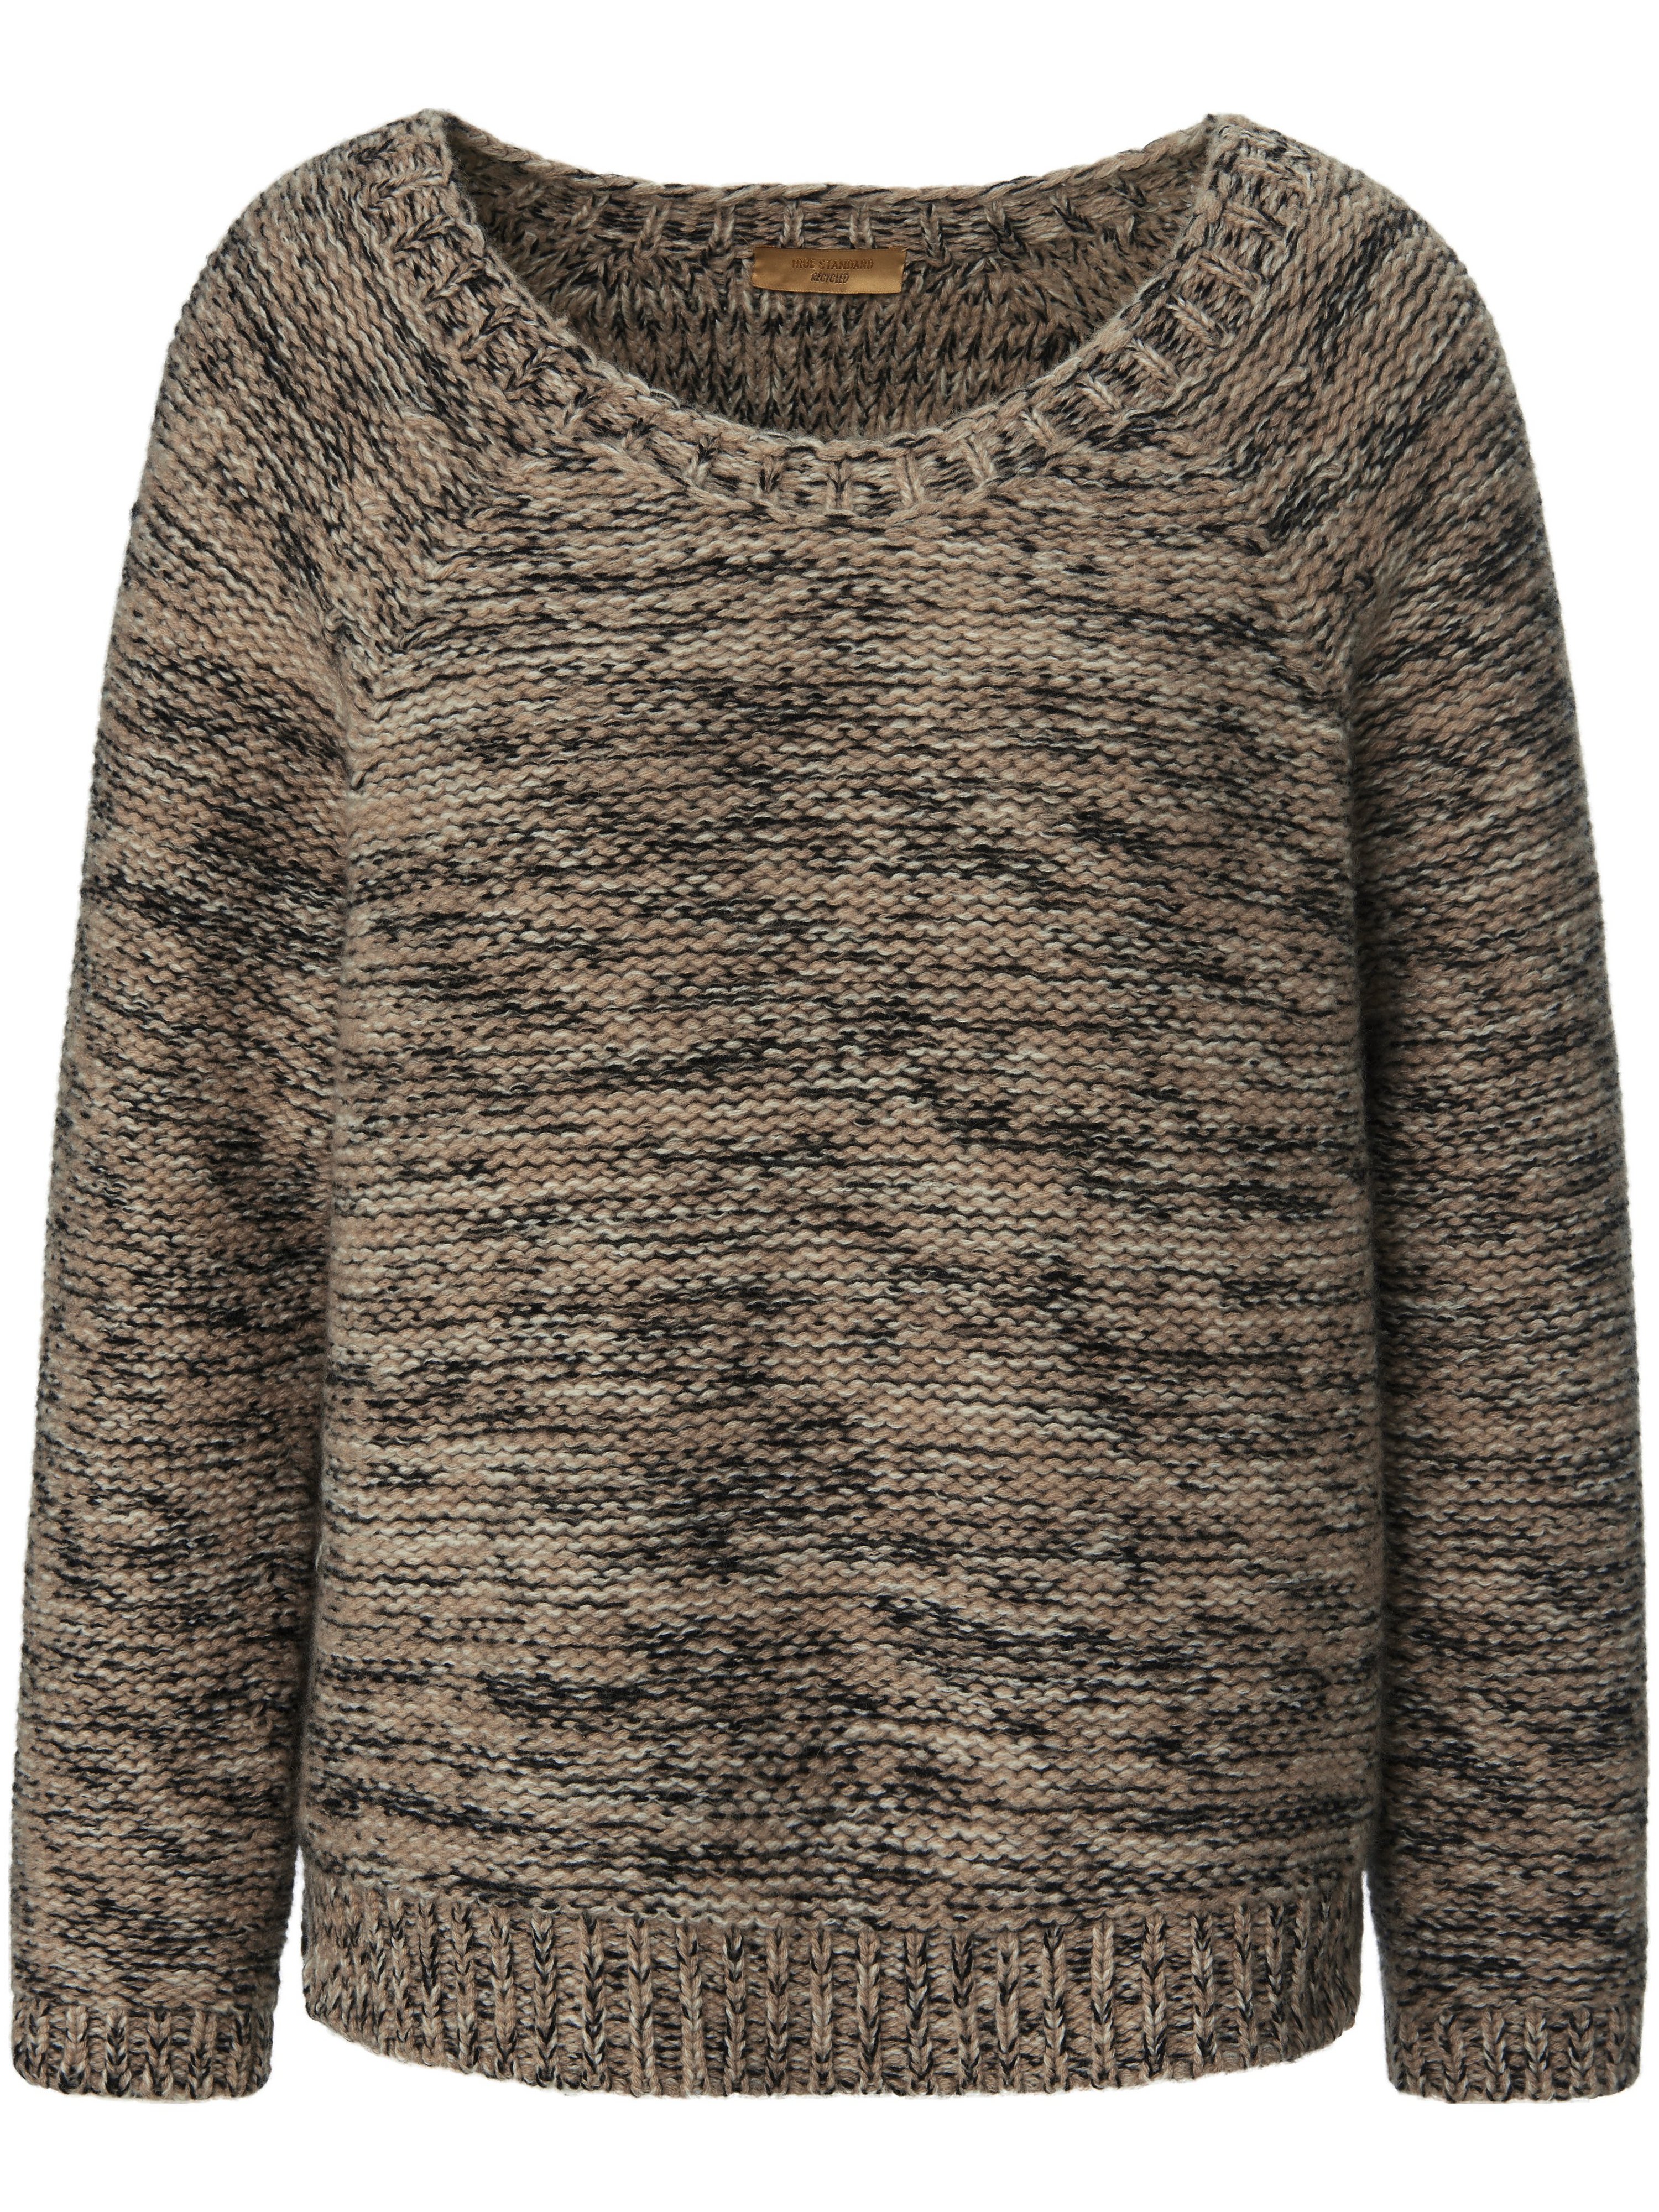 Le pull 100% cachemire  tRUE STANDARD beige taille 40